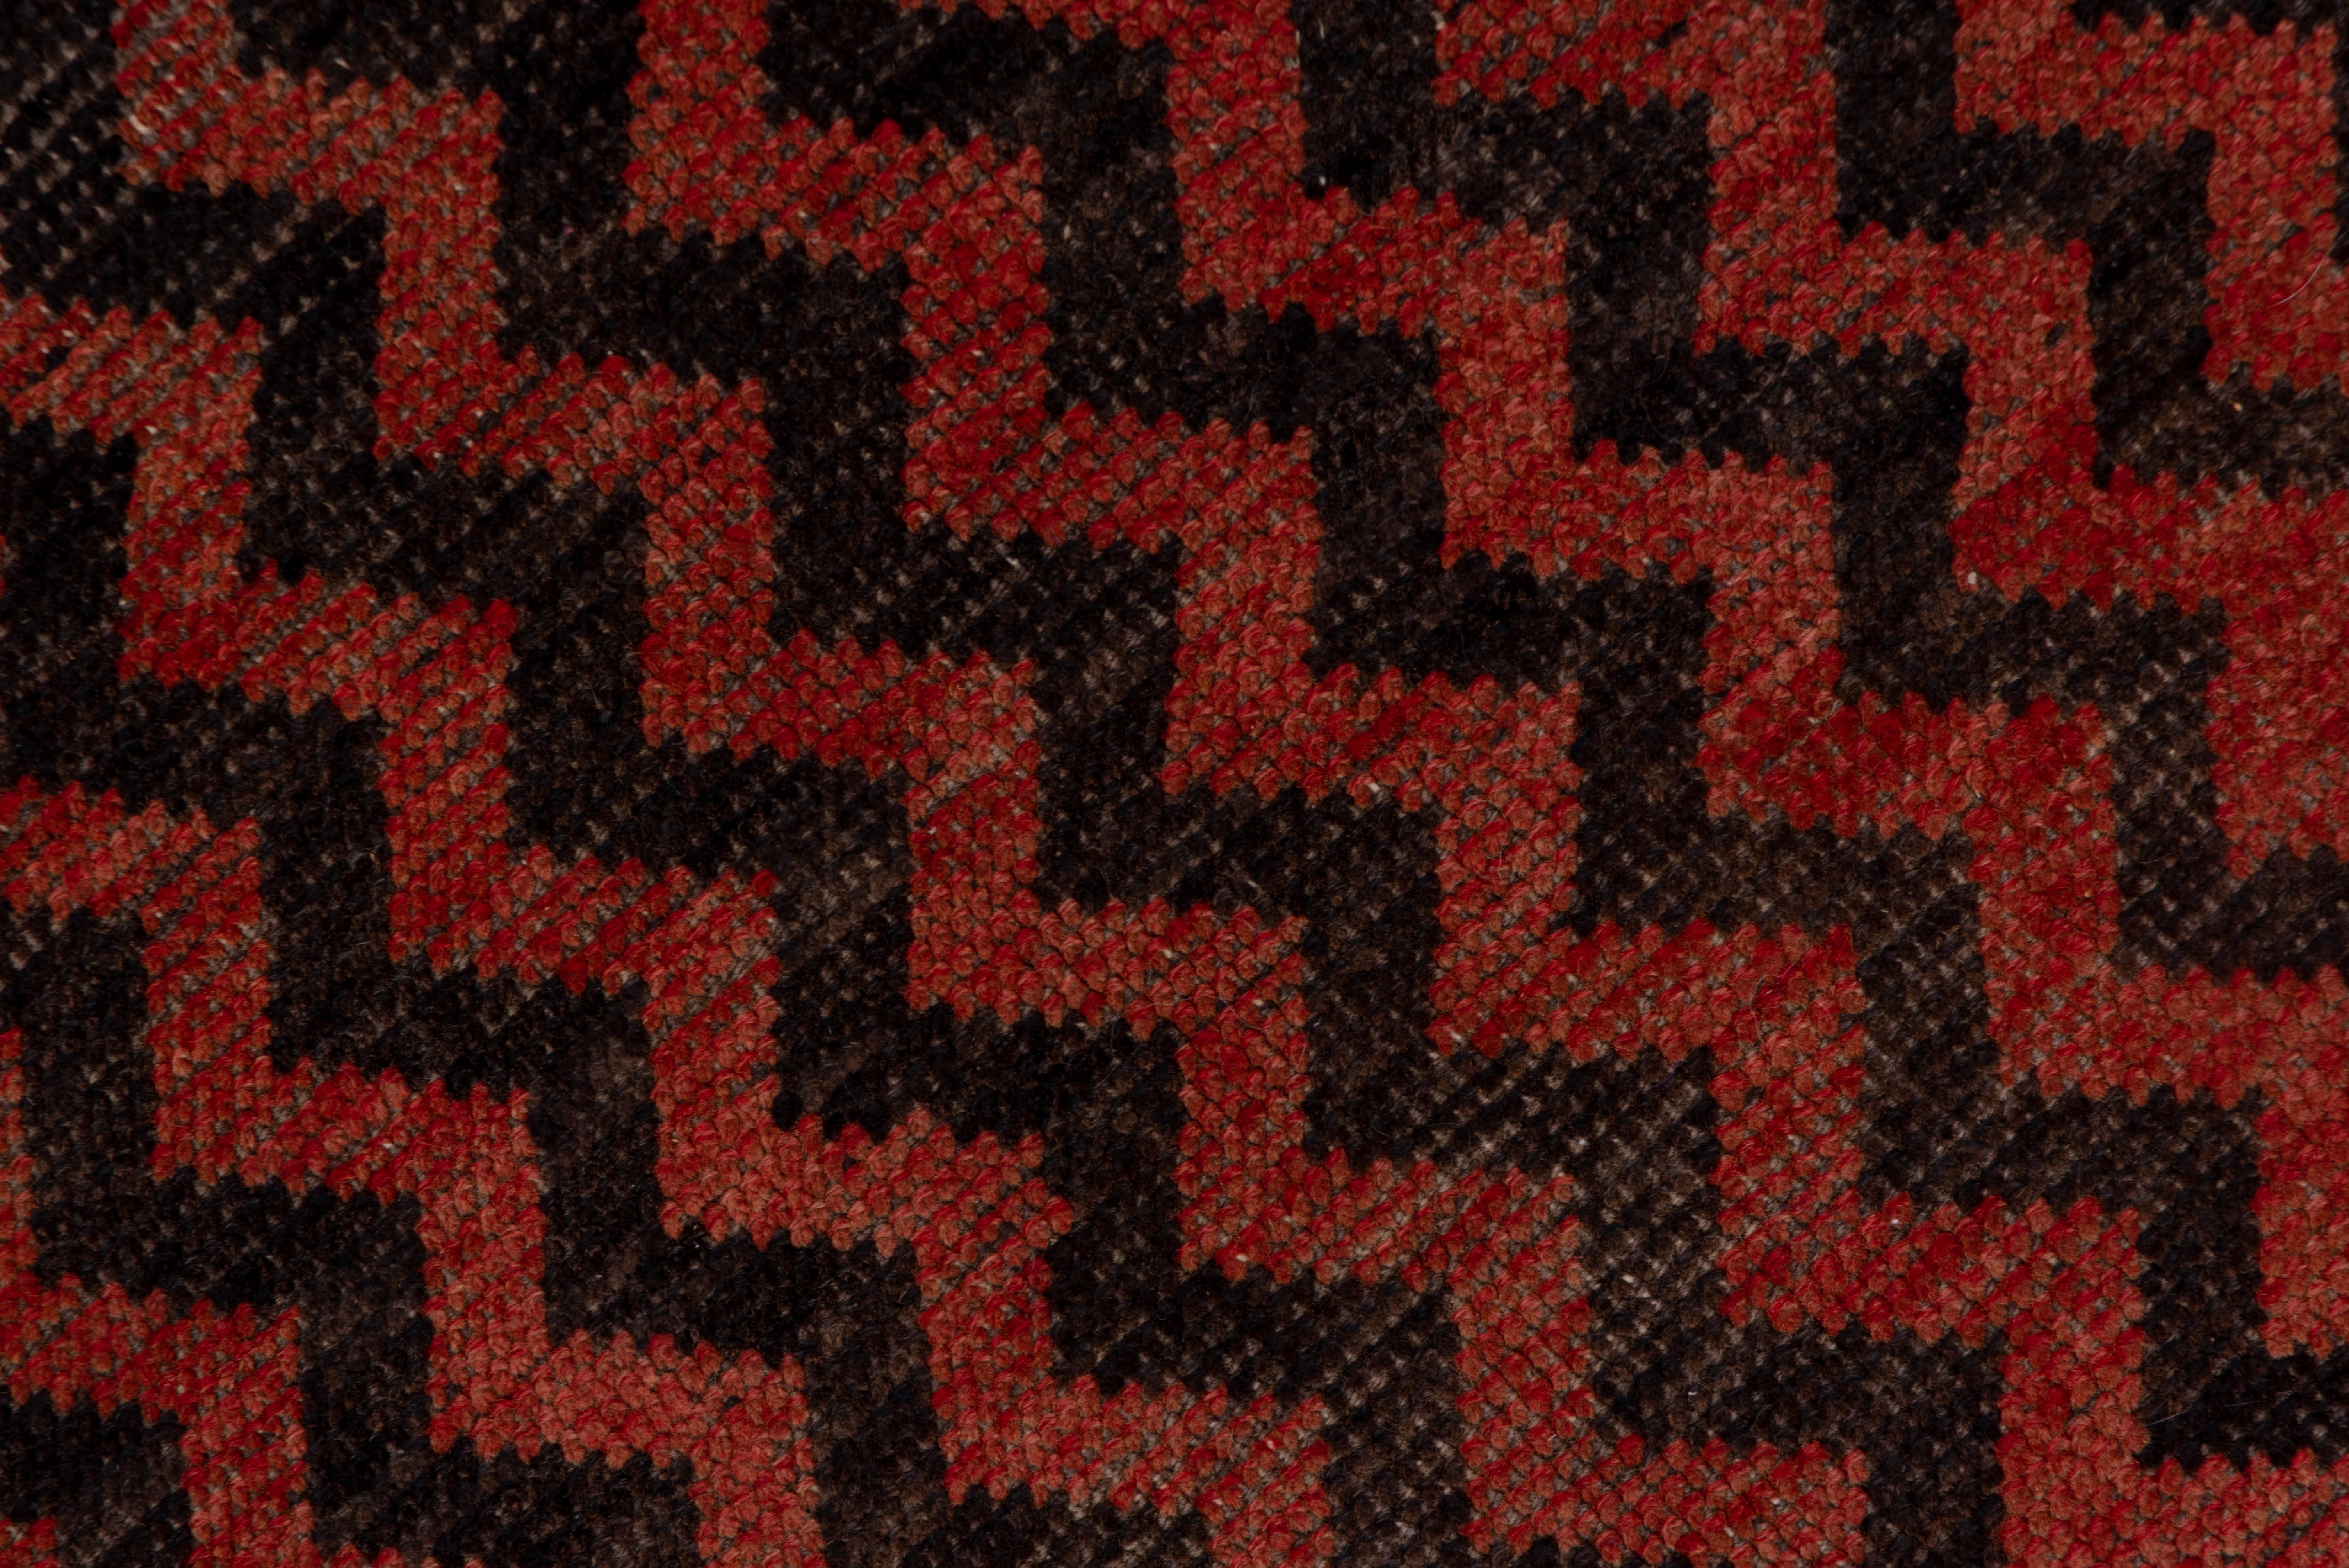 This central Turkish village carpet has no border and a striking vertical zig-zag pattern in abrashed soft red and charcoal.